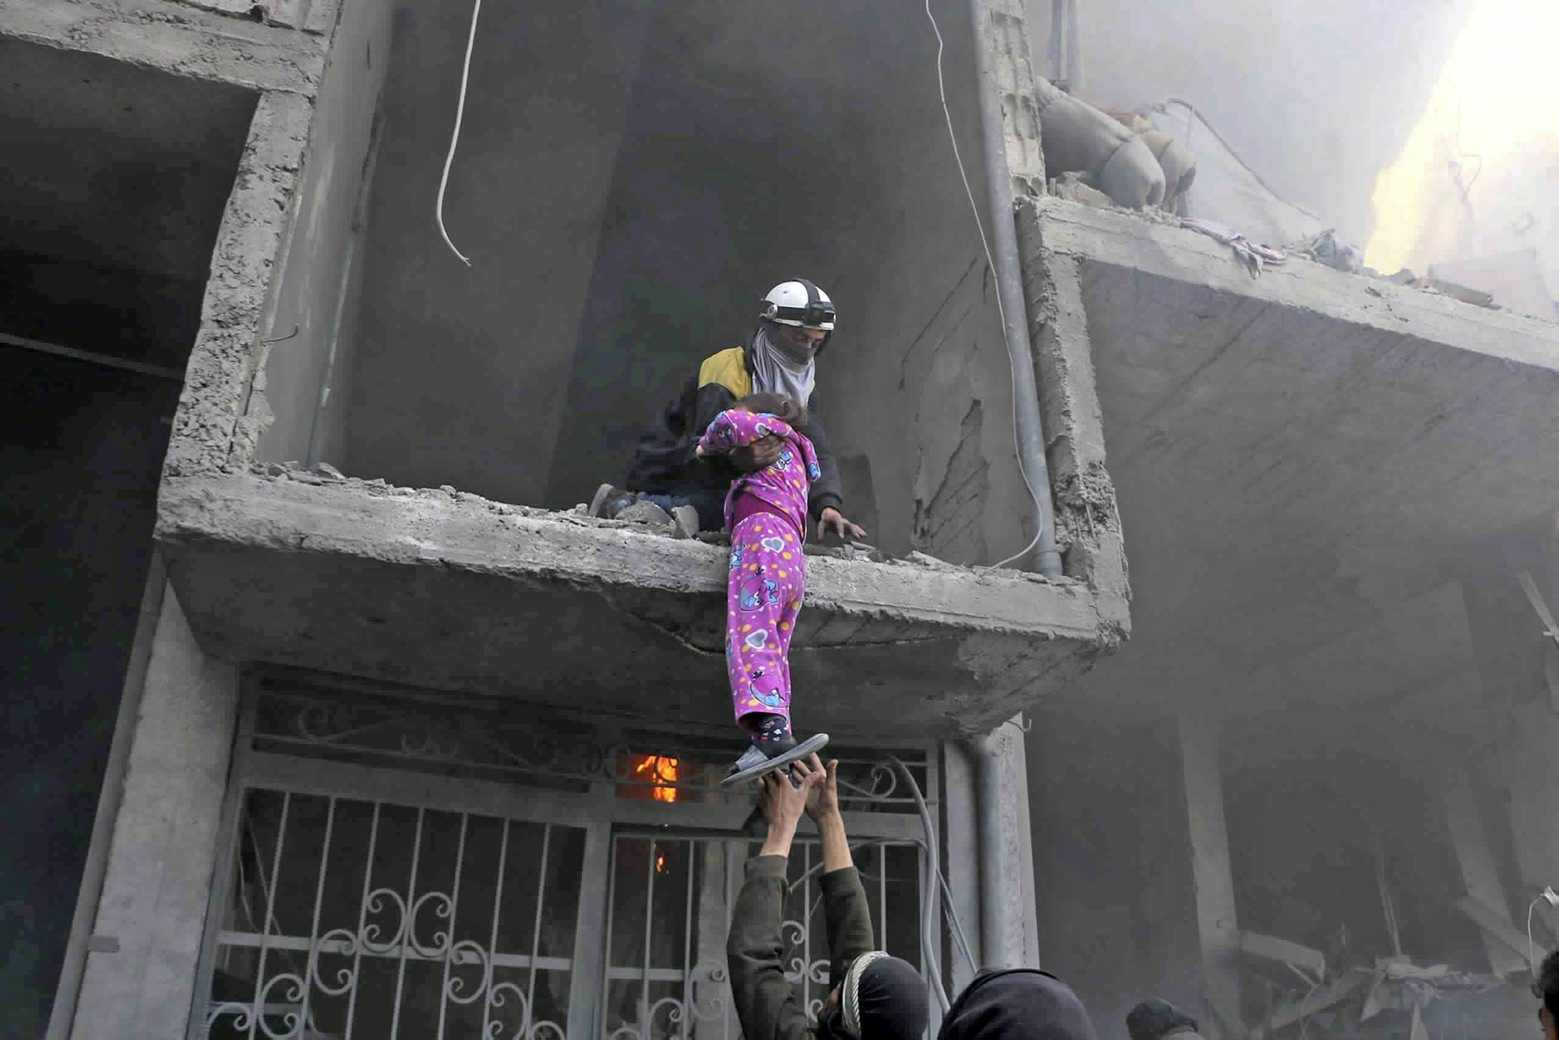 In this photo released on Wednesday Feb. 21, 2018 provided by the Syrian Civil Defense group known as the White Helmets, shows a member of the Syrian Civil Defense group rescuing a young girl from a damaged damaged by airstrikes and shelling by Syrian government forces, in Ghouta, a suburb of Damascus, Syria. New airstrikes and shelling on the besieged, rebel-held suburbs of the Syrian capital killed at least 10 people on Wednesday, a rescue organization and a monitoring group said. (Syrian Civil Defense White Helmets via AP) Syria